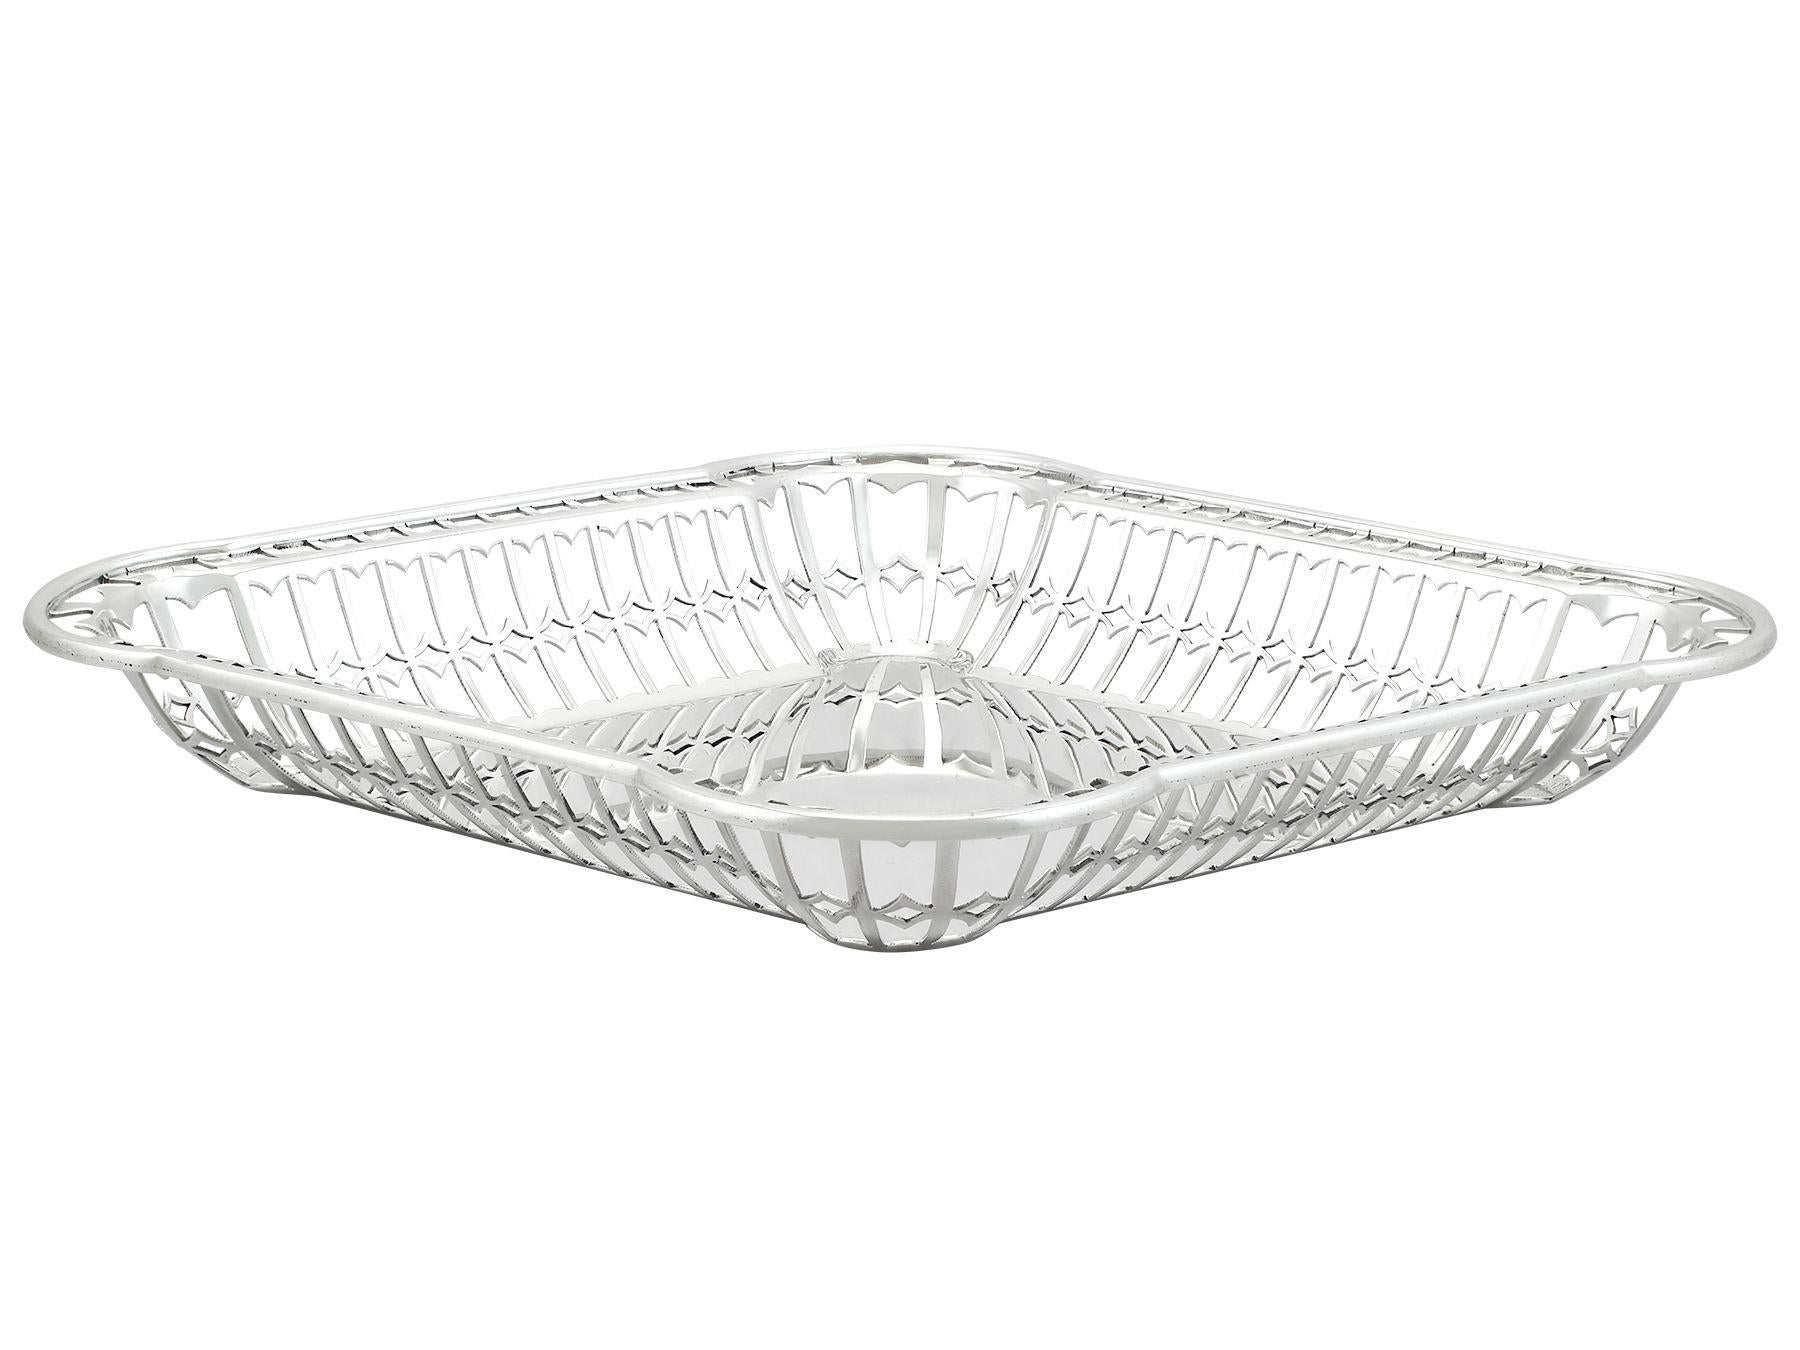 An exceptional, fine and impressive antique George V English sterling silver bread dish; an addition to our dining silverware collection

This exceptional, fine and impressive antique sterling silver dish has a highly desirable navette shaped